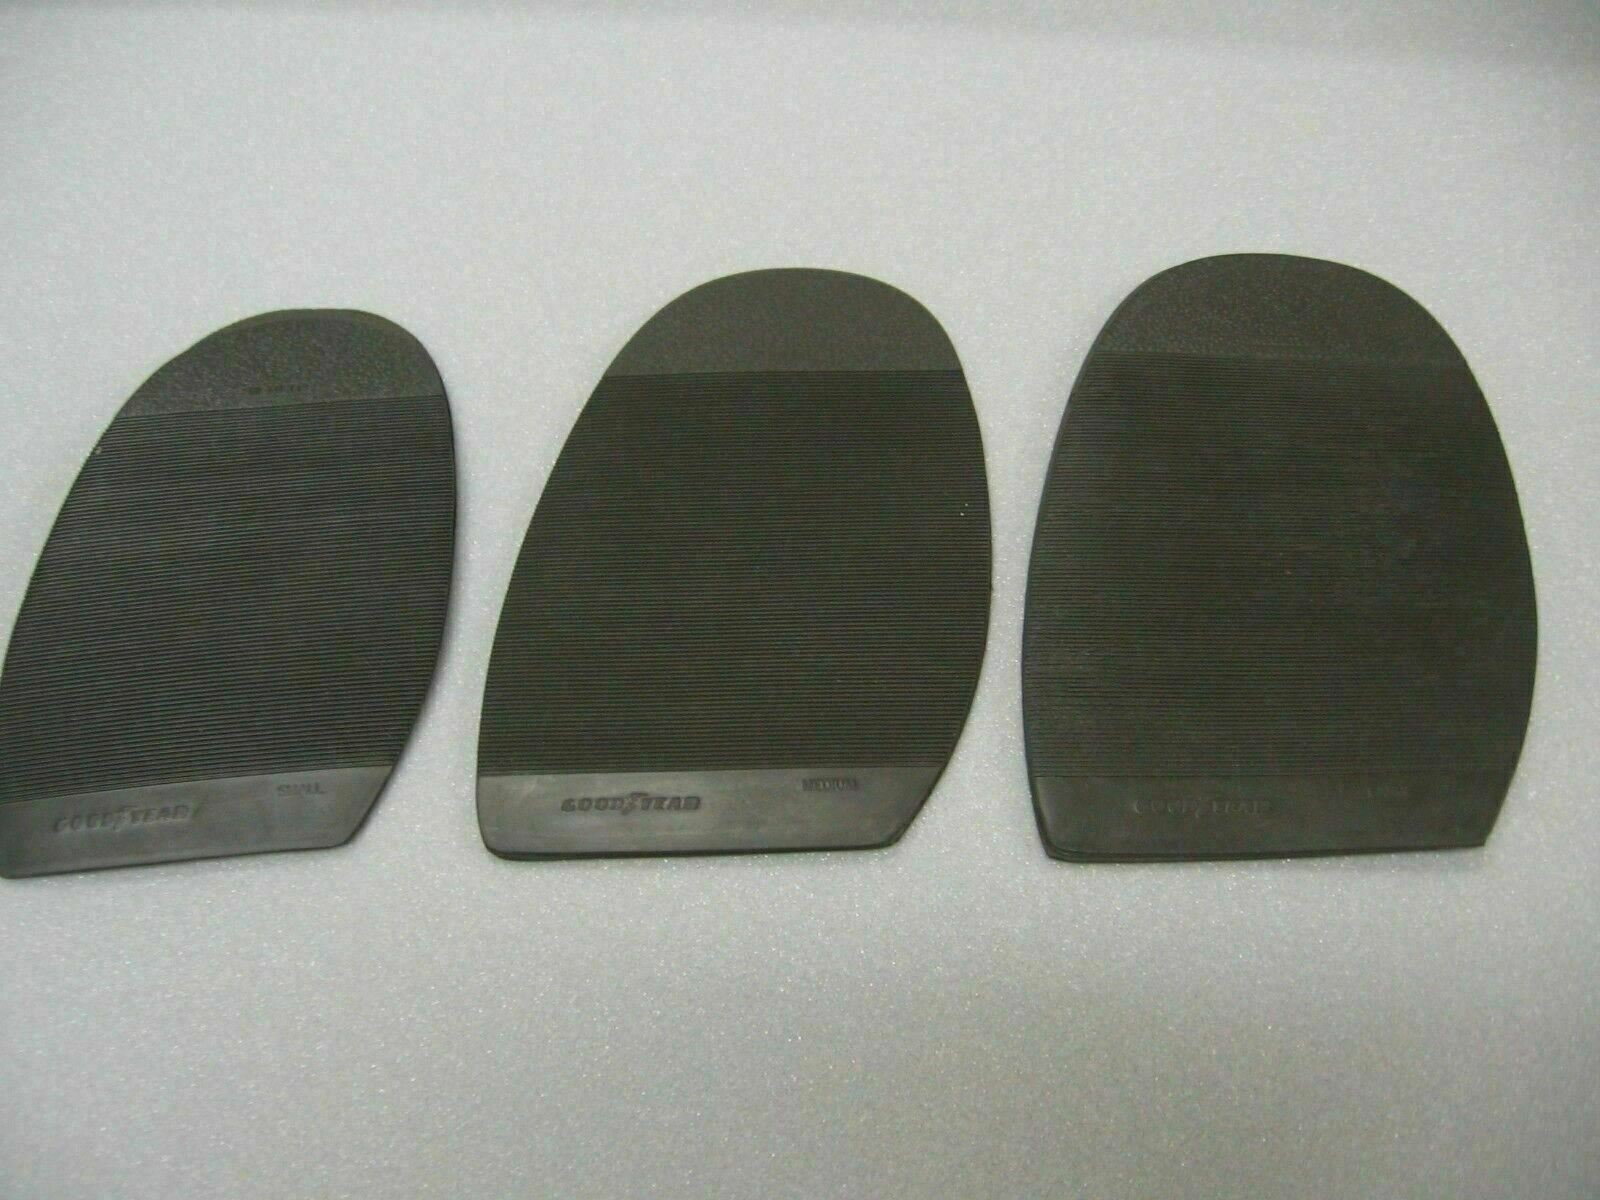 GoodYear/Soletech Protective Half Sole Guards -Shoe Repair - Pic-A-Size  -1 Pair